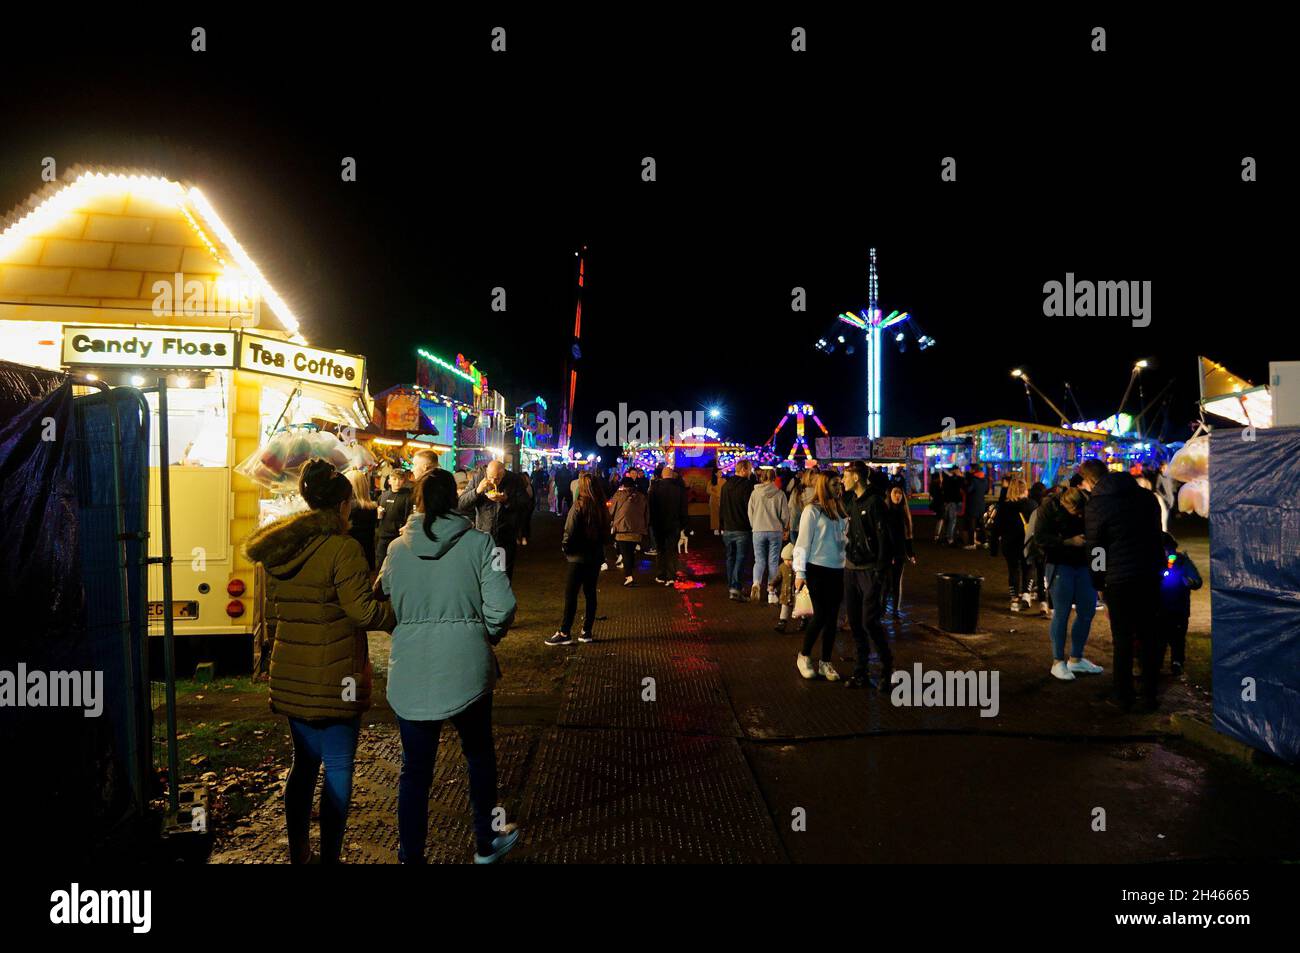 People at the night time autumn fair in the park Stock Photo